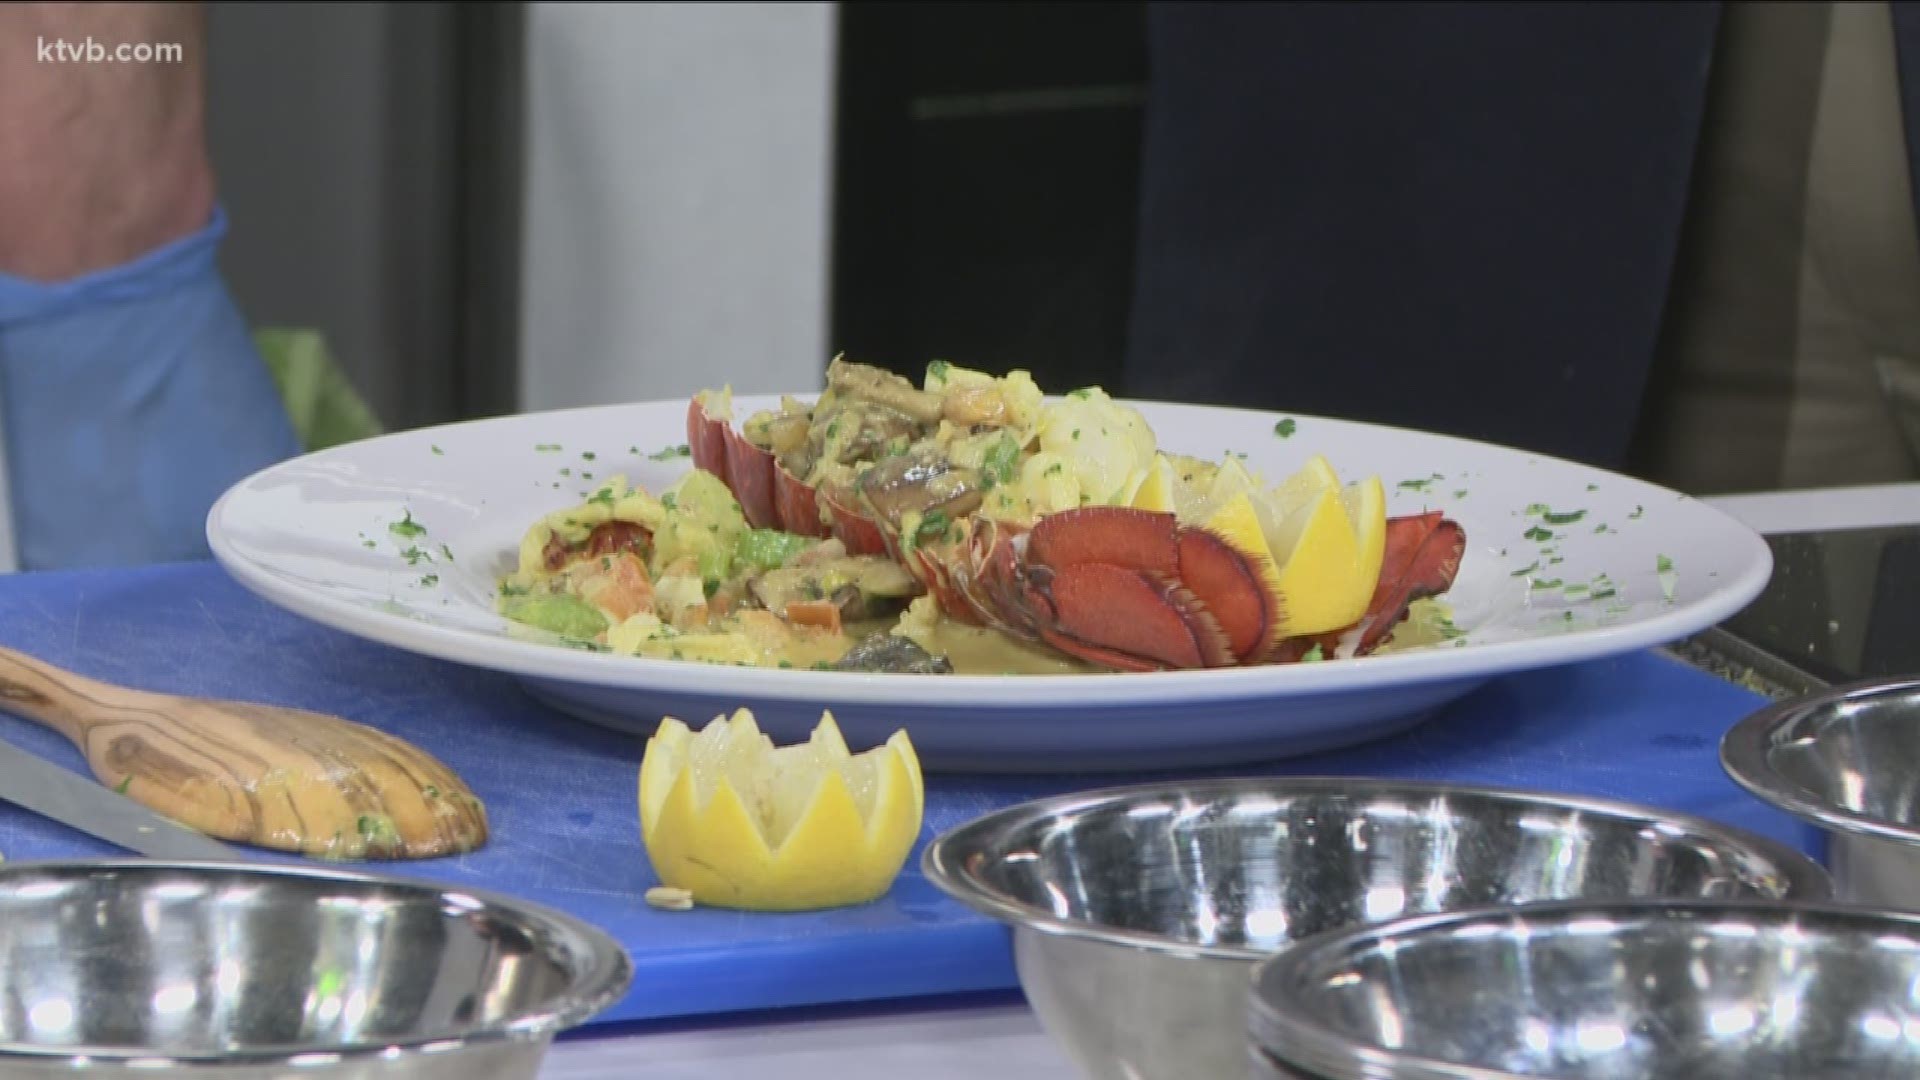 Chef Bacquet joins Tami Tremblay and Larry Gebert to cook his delicious lobster curry for holiday meals.